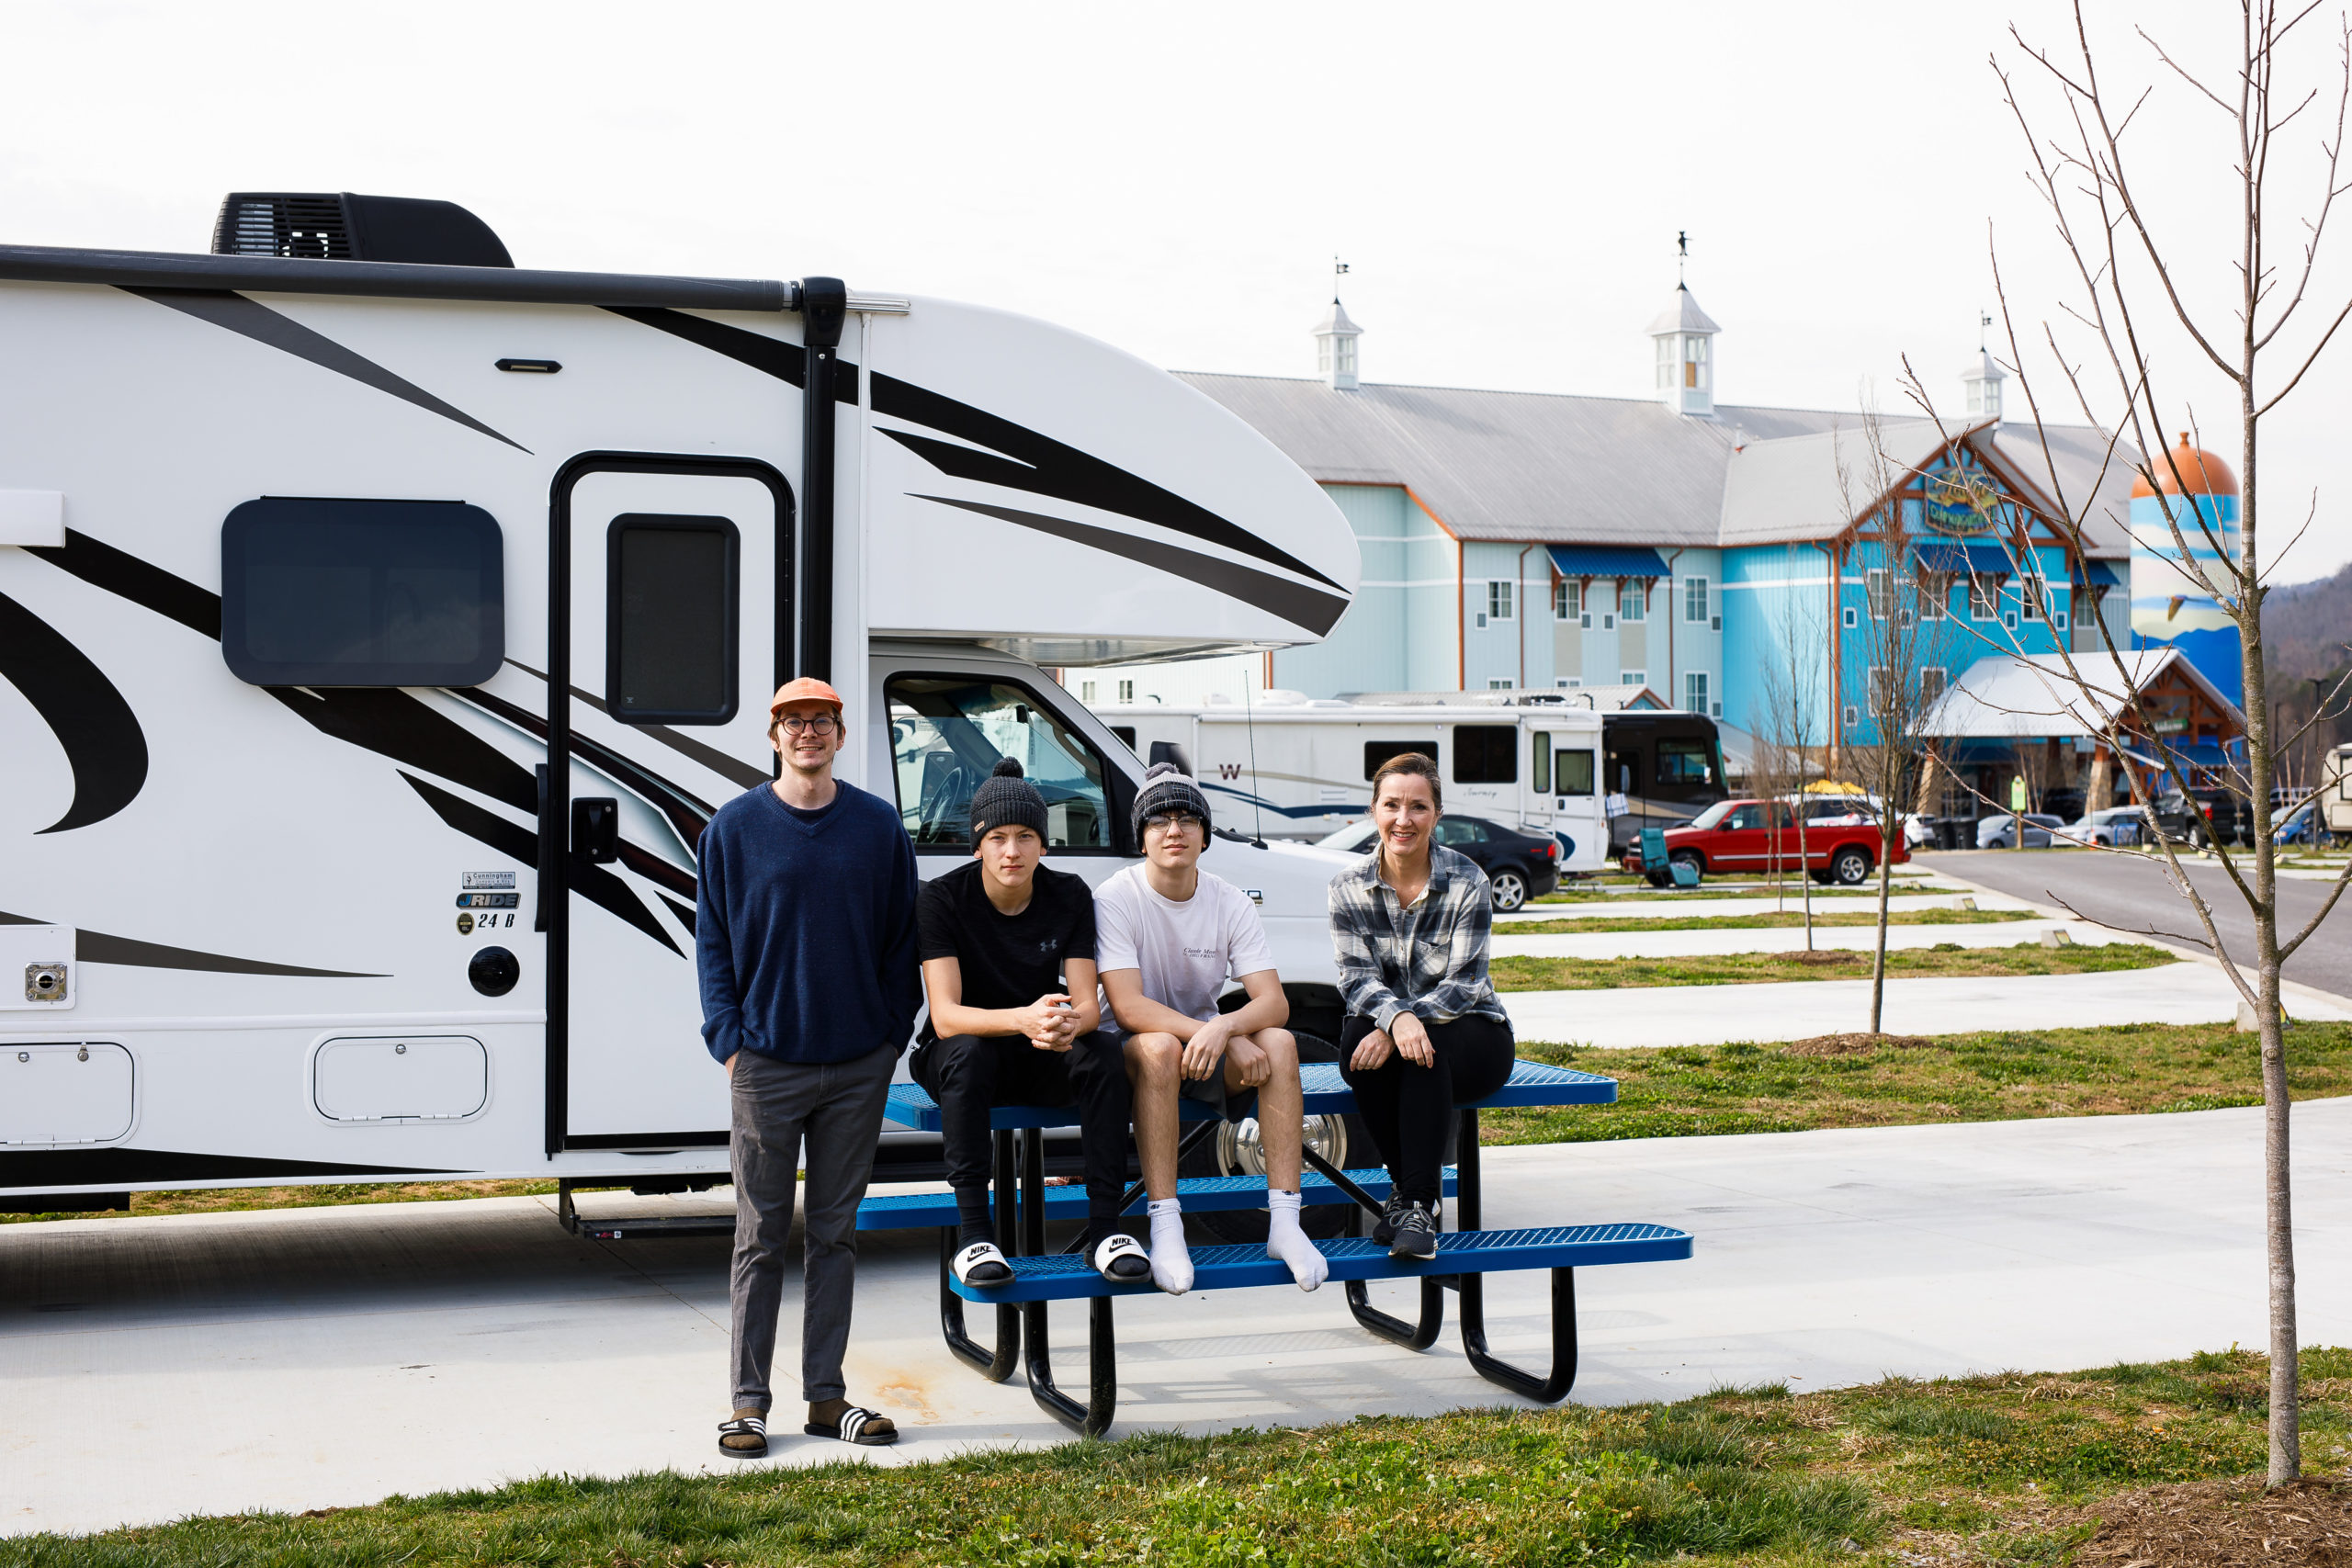 A mom and kids sitting in an RV park